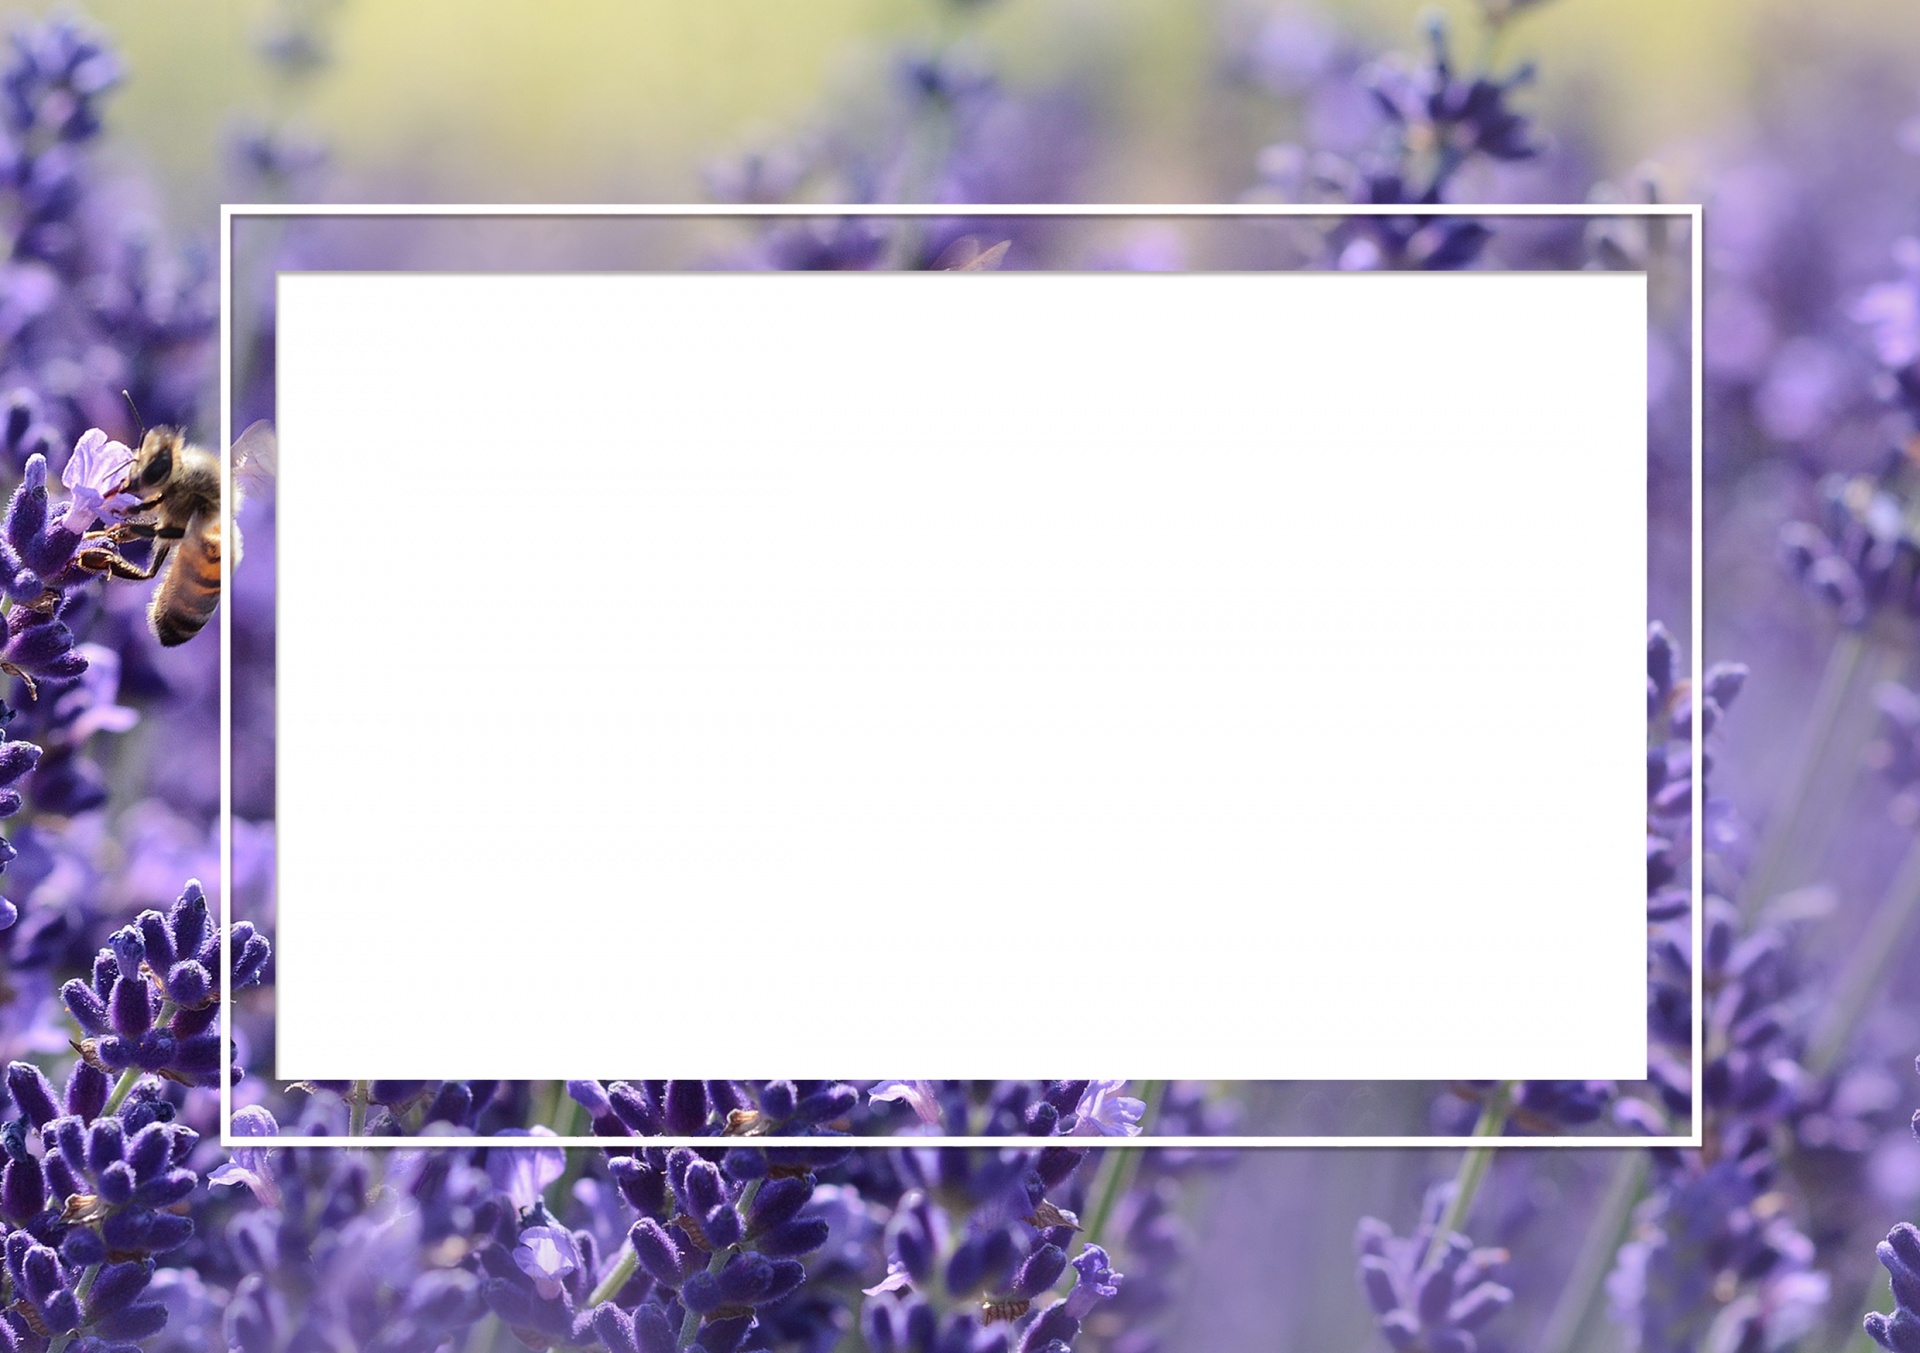 Lavender photo or picture frame